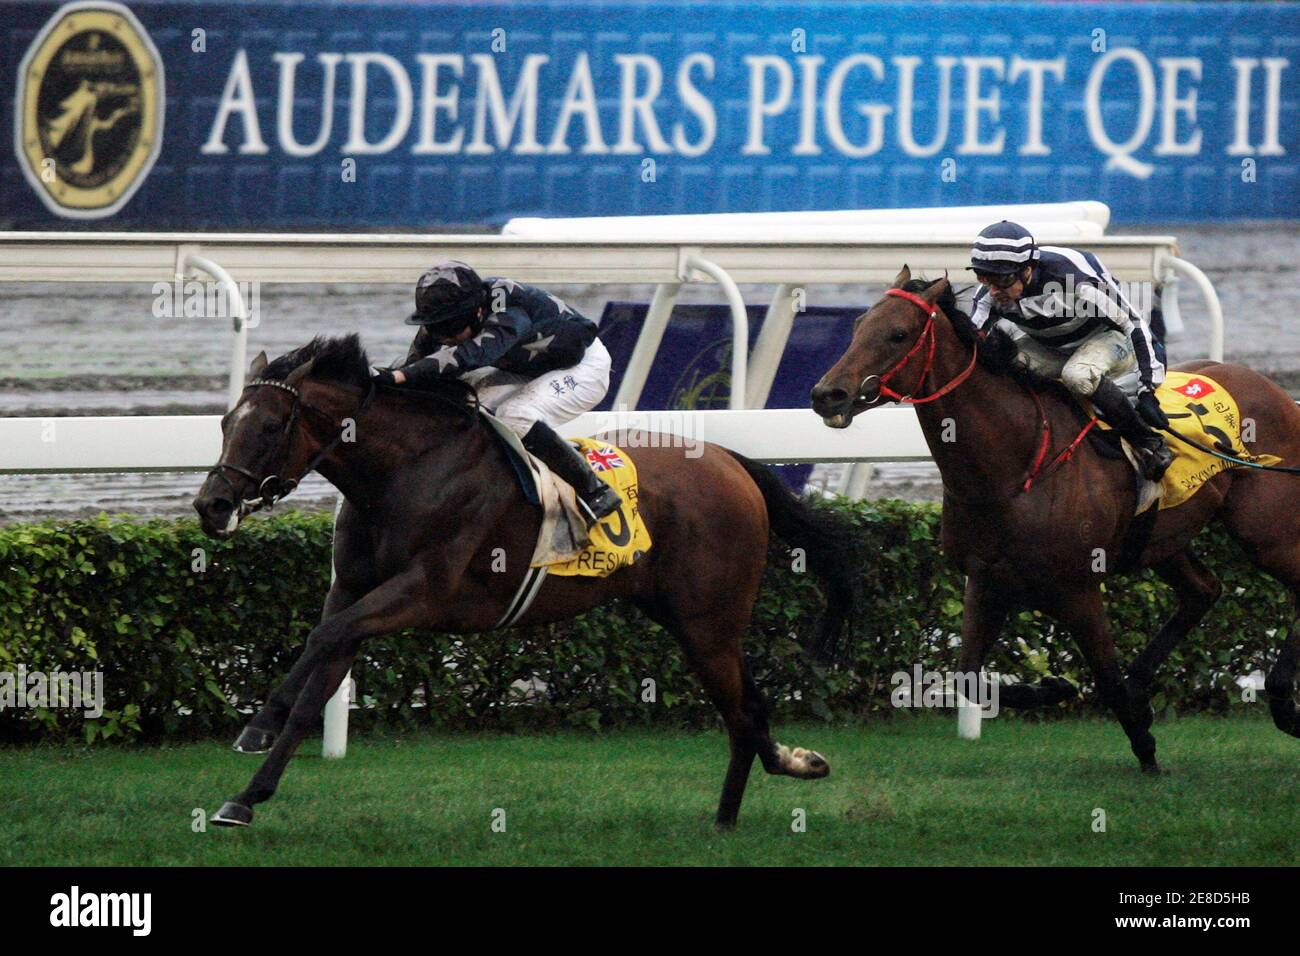 British jockey Ryan Moore riding Presvis (L) and French jockey Eric Saint-Martin riding Packing Winner compete in the 2,000m Audemars Piguet QE II cup at Hong Kong's Sha Tin racecourse April 26, 2009.    REUTERS/Tyrone Siu    (CHINA SPORT EQUESTRIANISM) Stock Photo